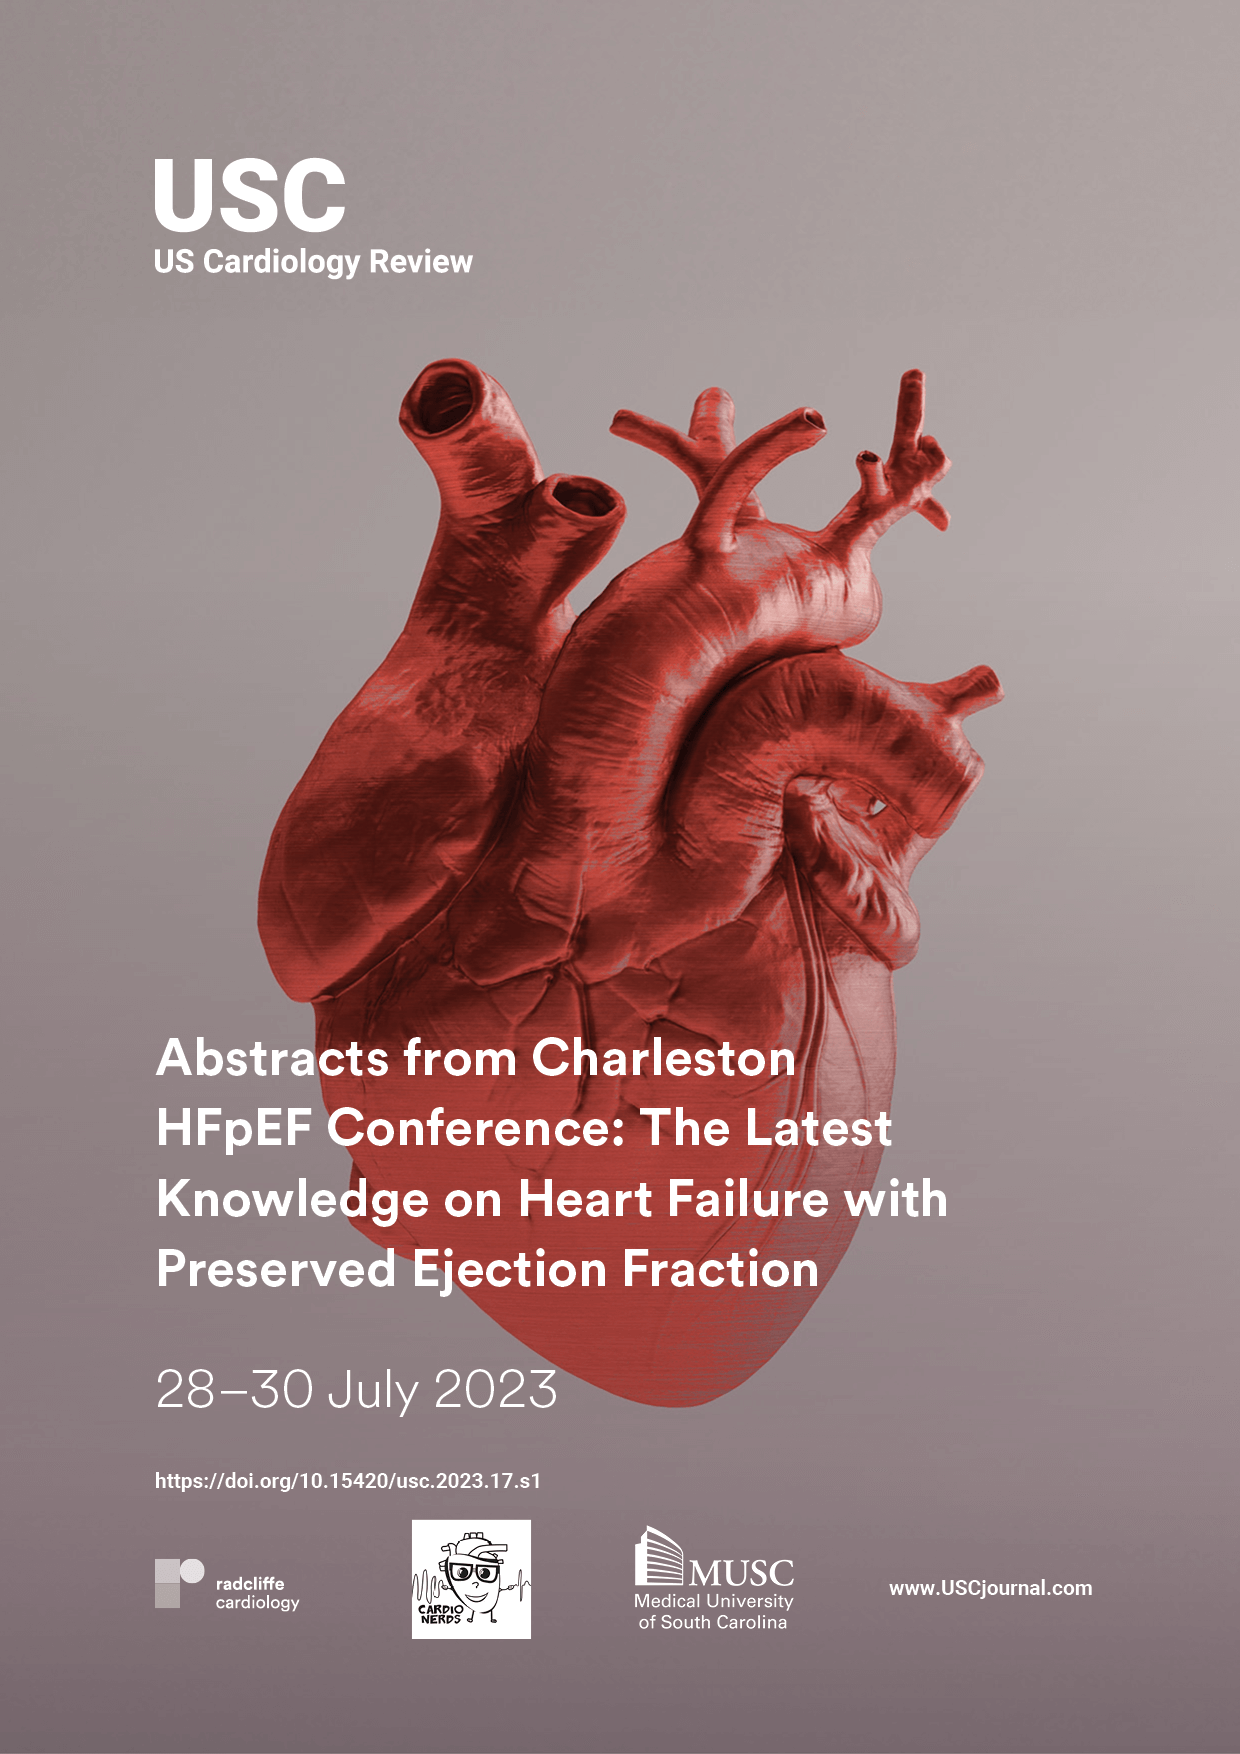 Abstracts from 2023 Charleston HFpEF Conference: The Latest Knowledge on Heart Failure with Preserved Ejection Fraction